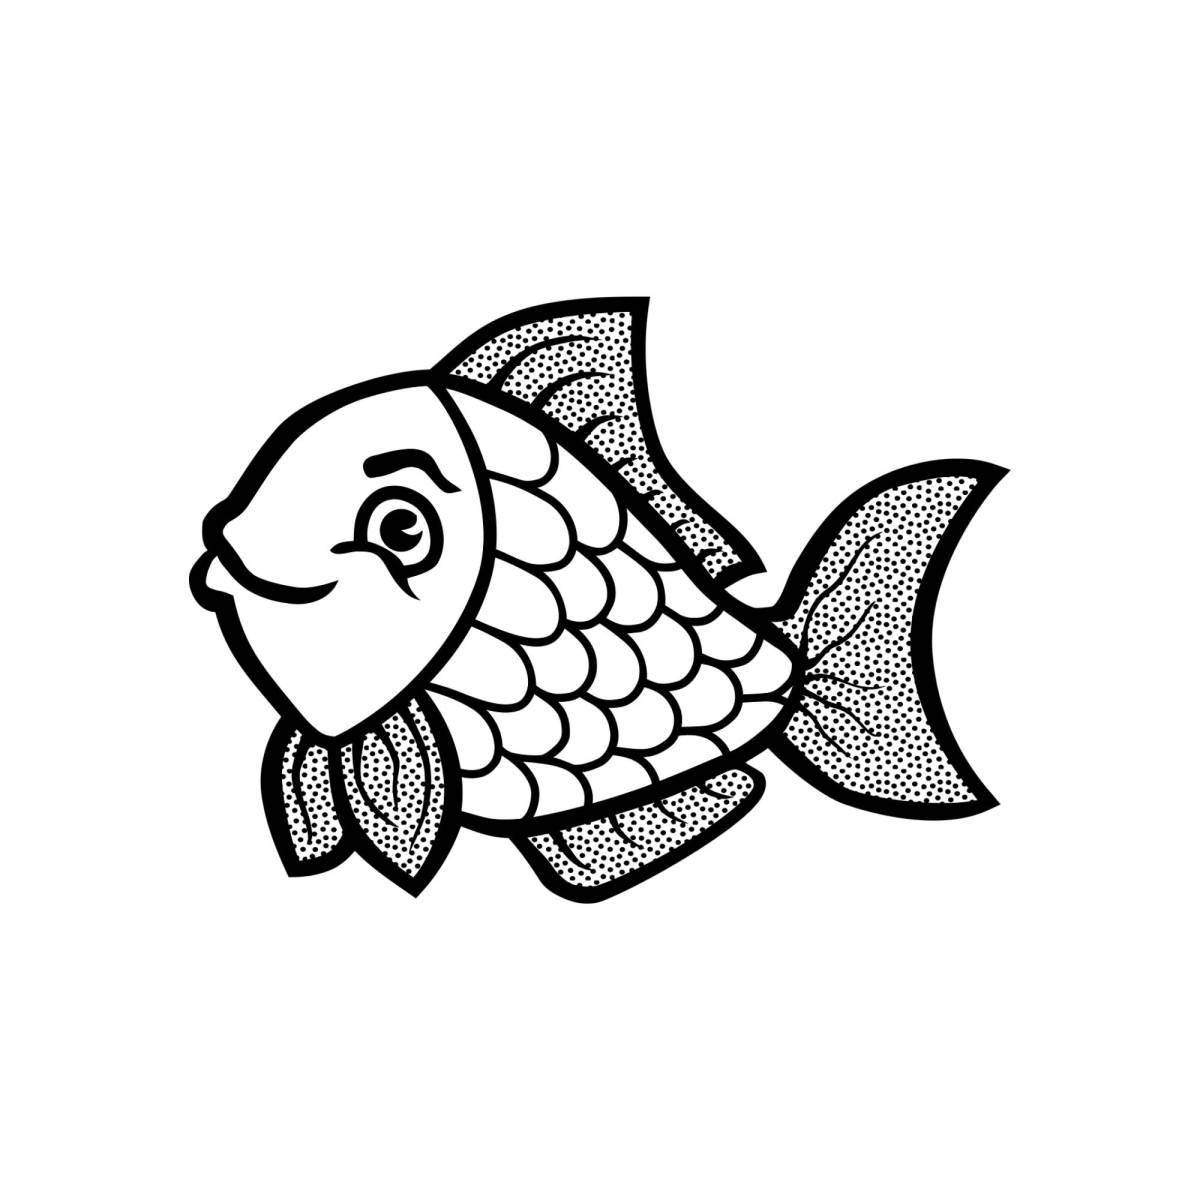 Attractive fish coloring book for boys